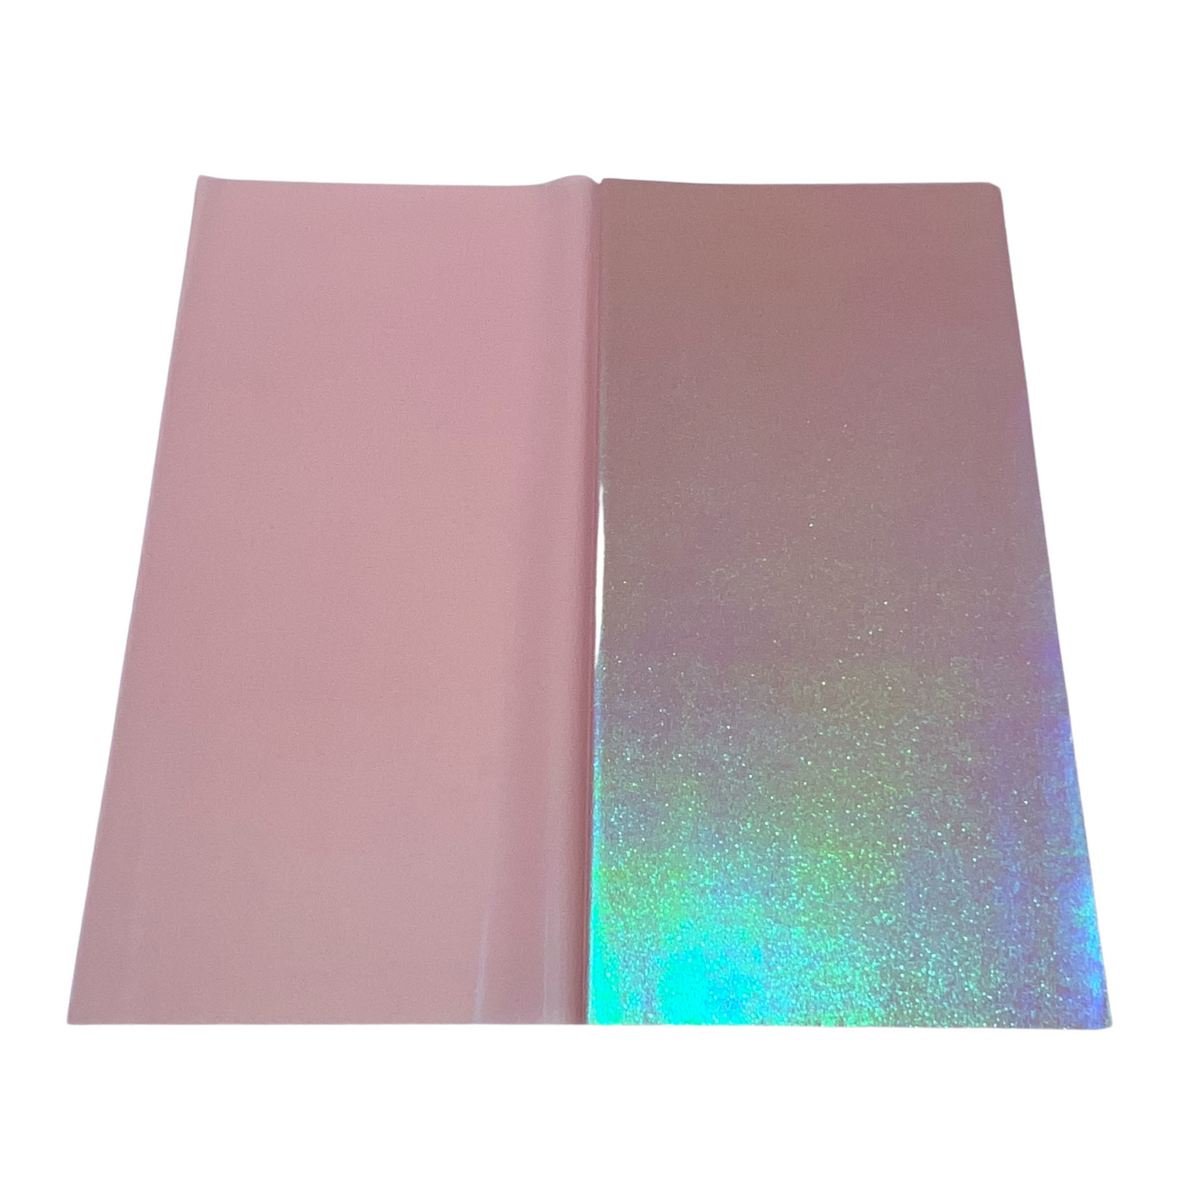 Iridescent Floral Wrapping Paper (PEACH PINK)